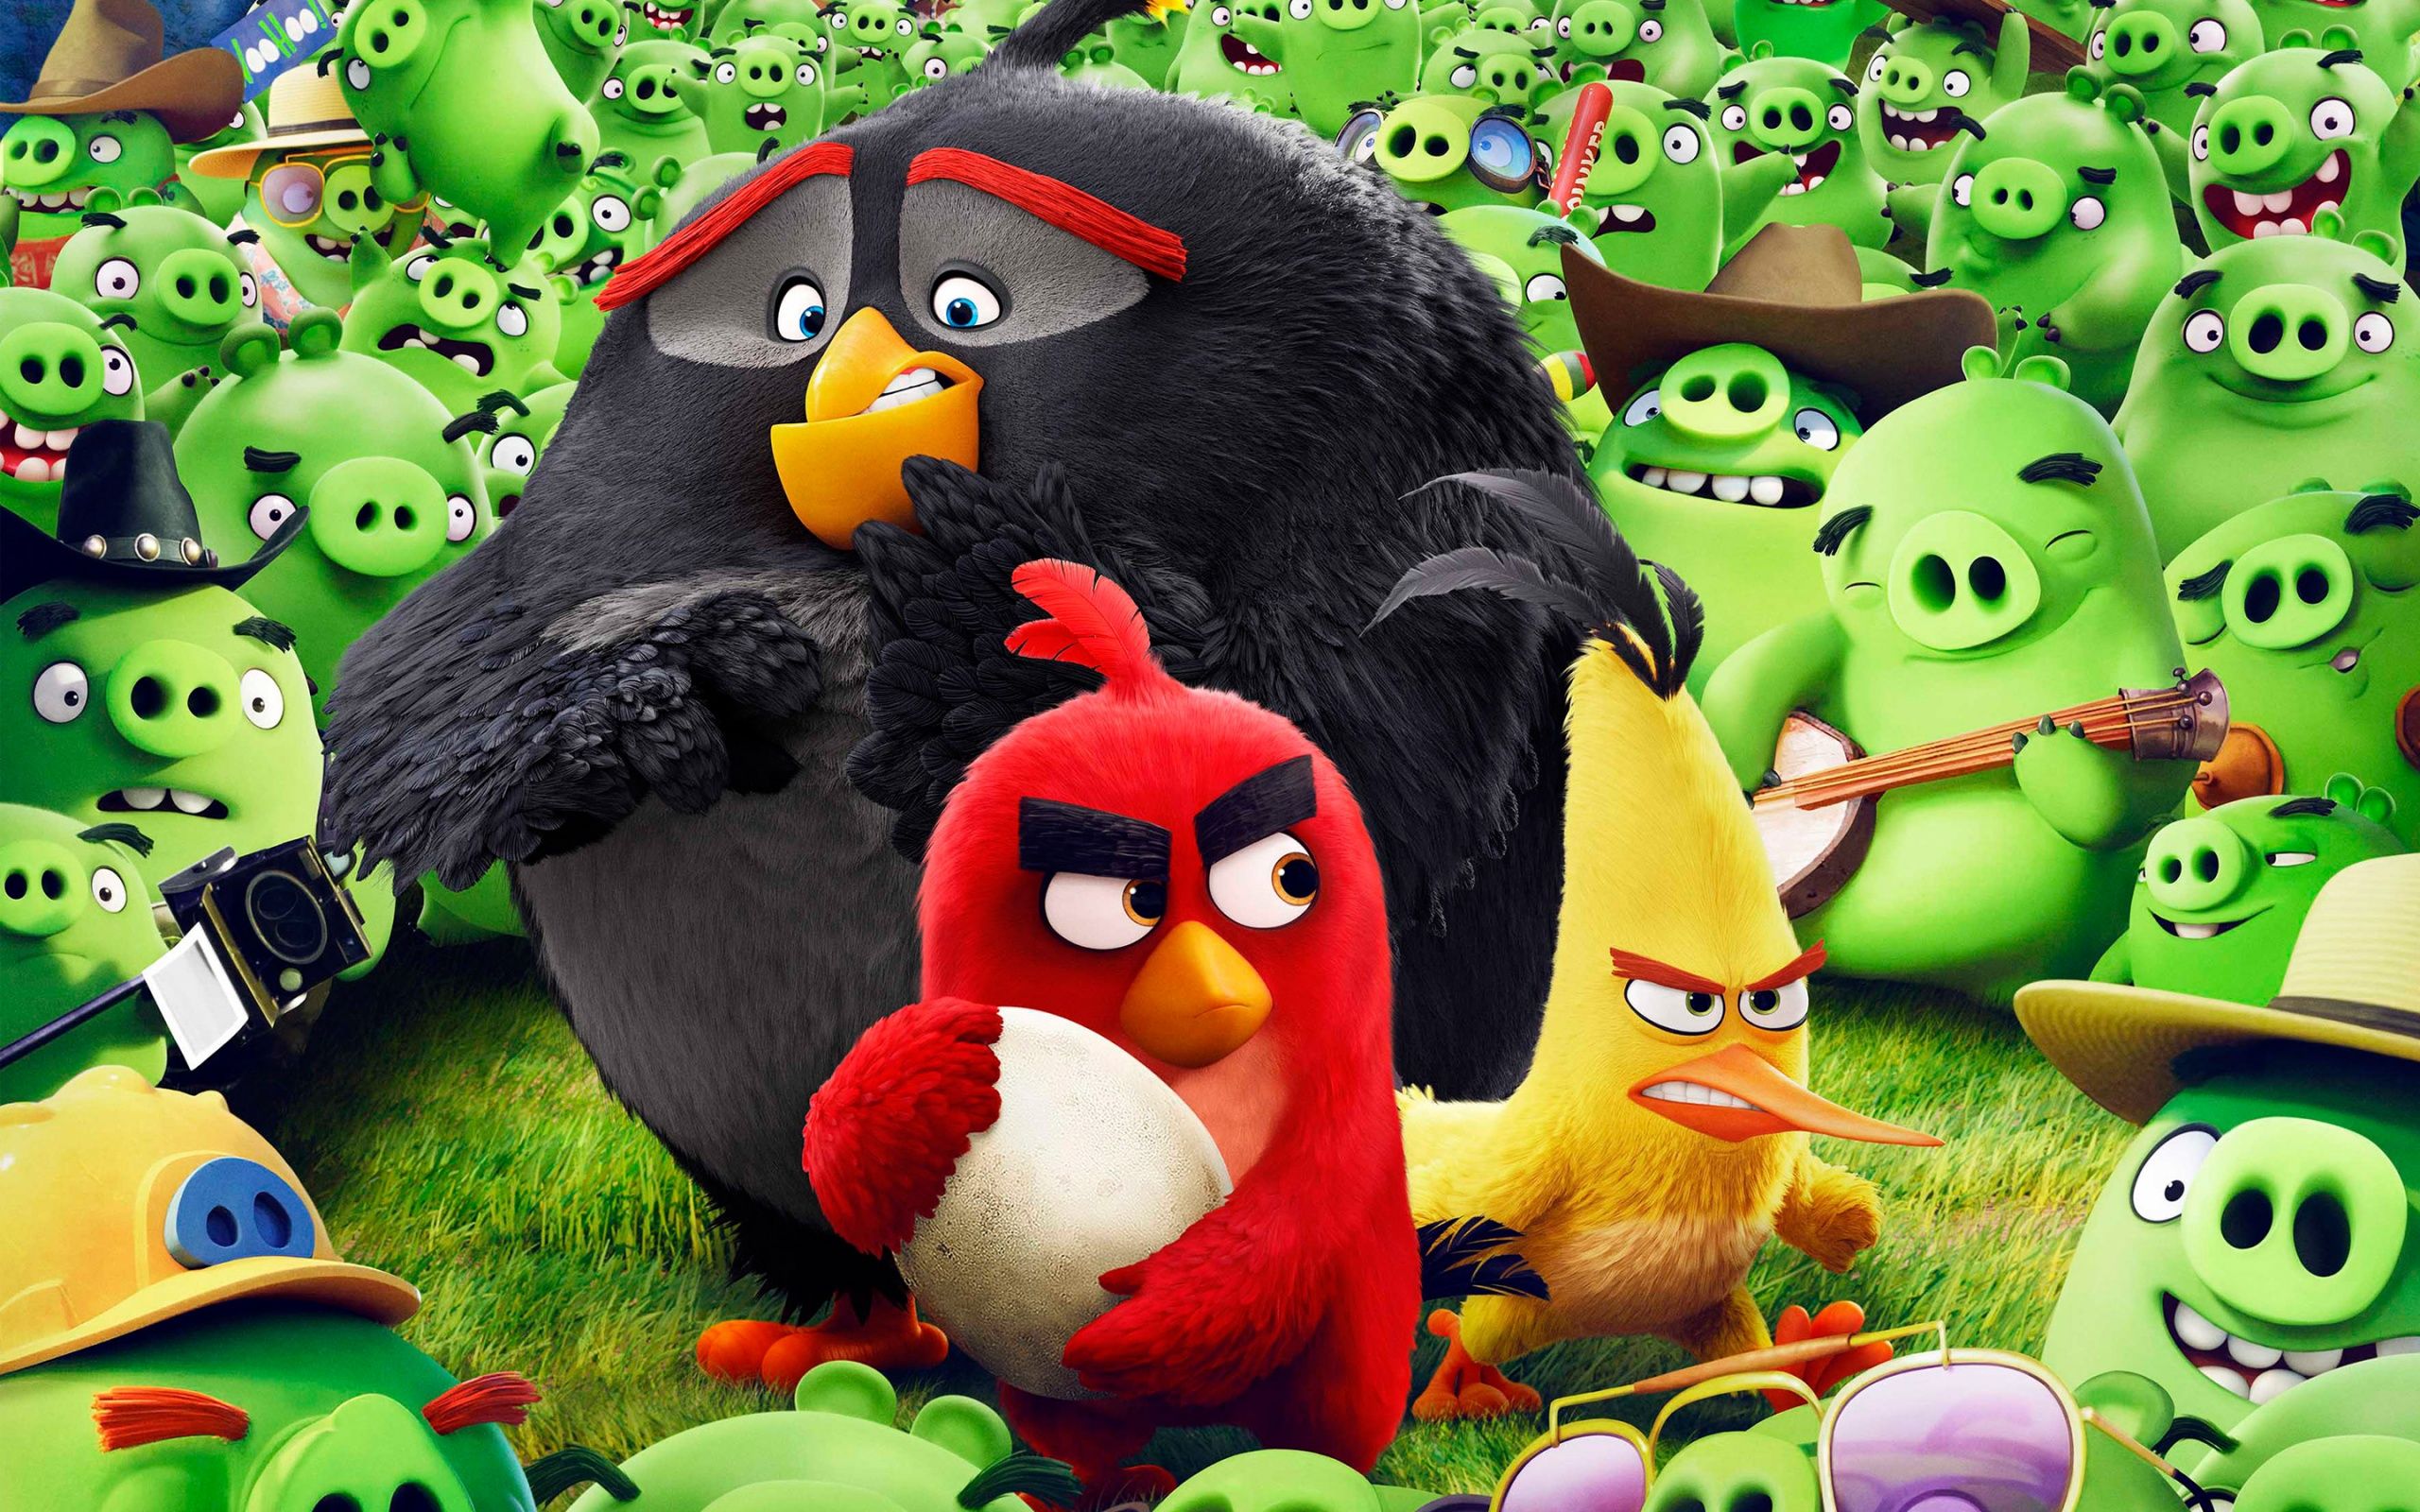 Angry Birds Animation Movie Wallpaper in jpg format for free download